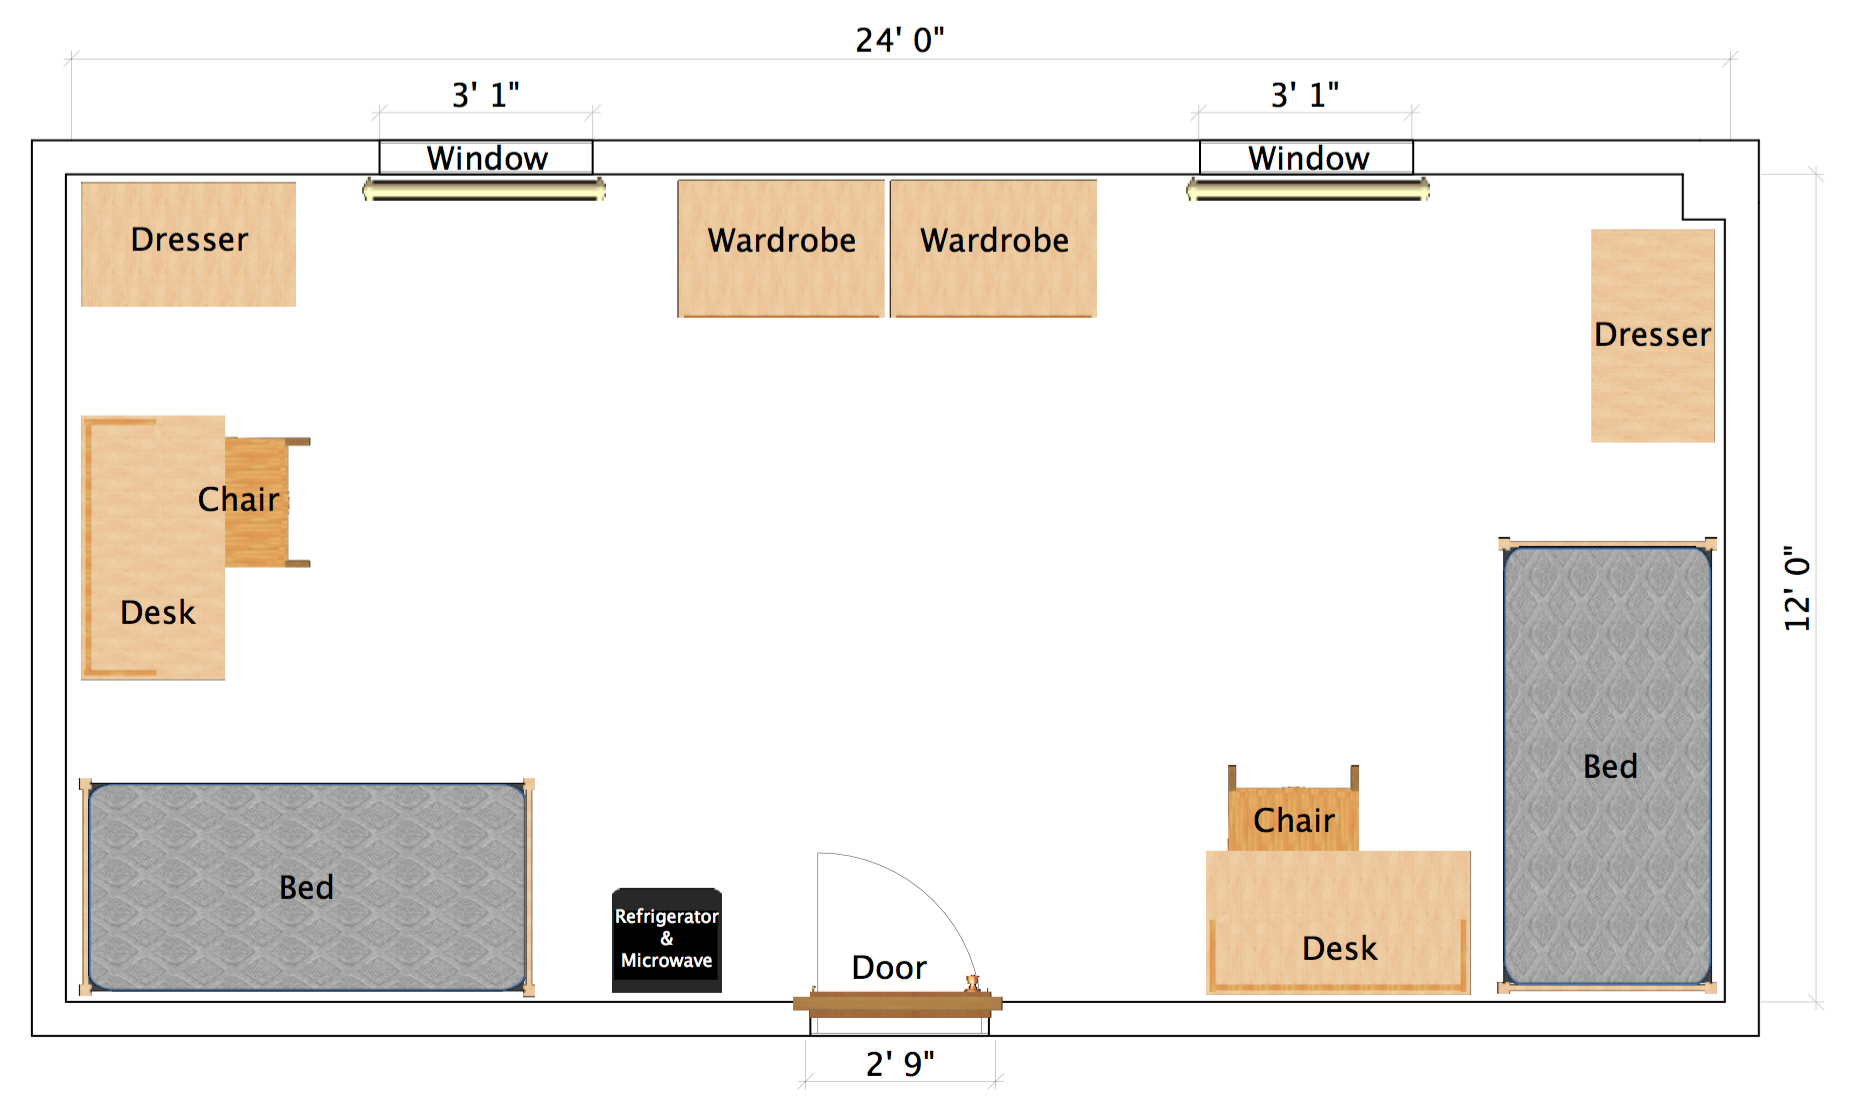 diagram of typical double room layout with desks, beds, dressers and wardrobes